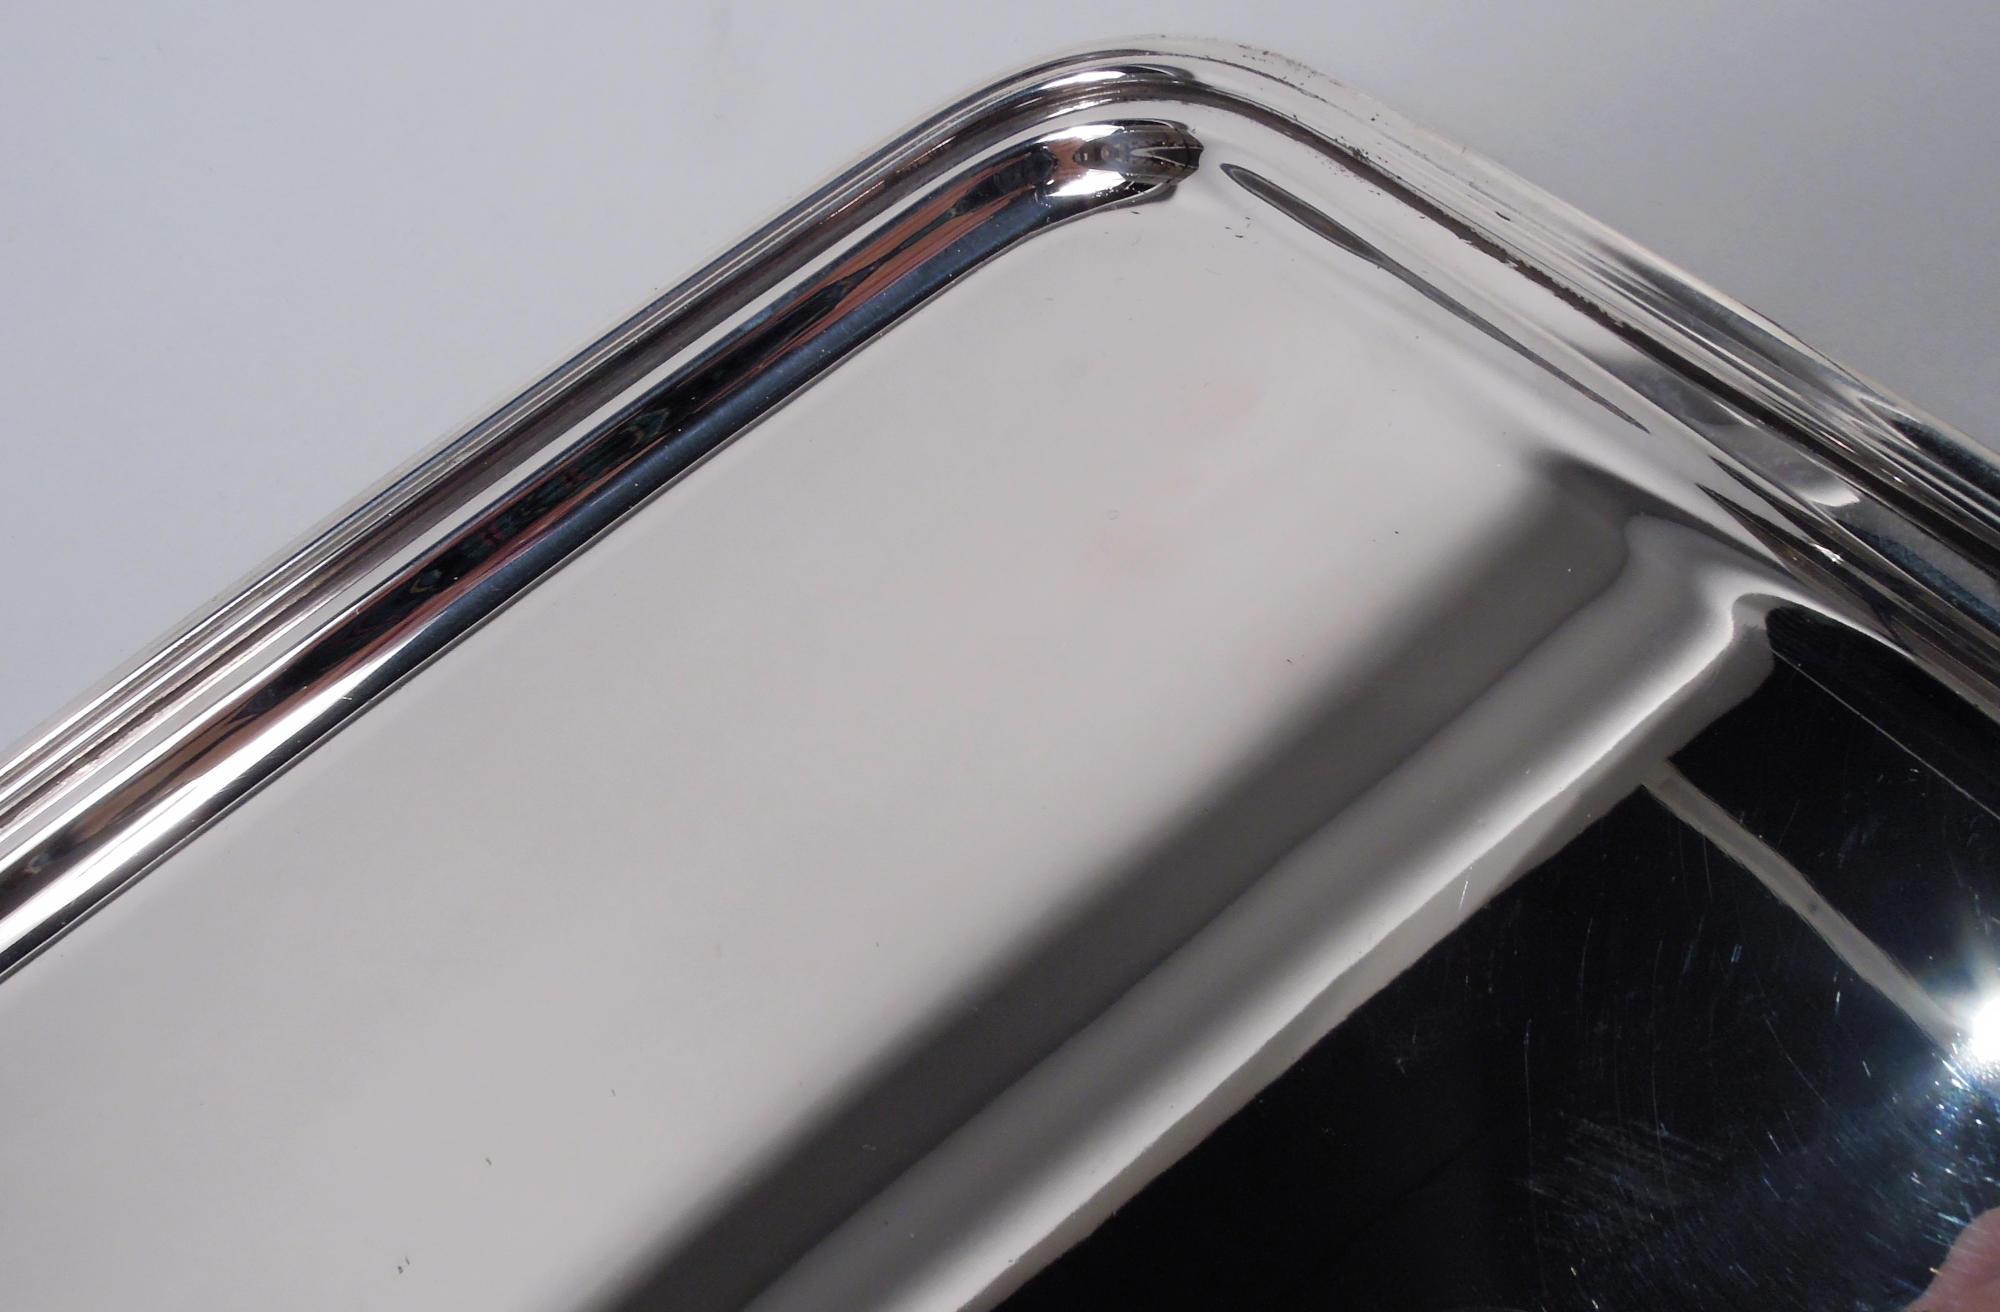 Modern sterling silver tray. Made by Tiffany & Co. in New York, ca 1960. Rectangular well with curved corners, flat and narrow shoulder, and reeded rim. Fully marked including maker’s stamp and pattern no. 20151. Weight: 23.8 troy ounces. 